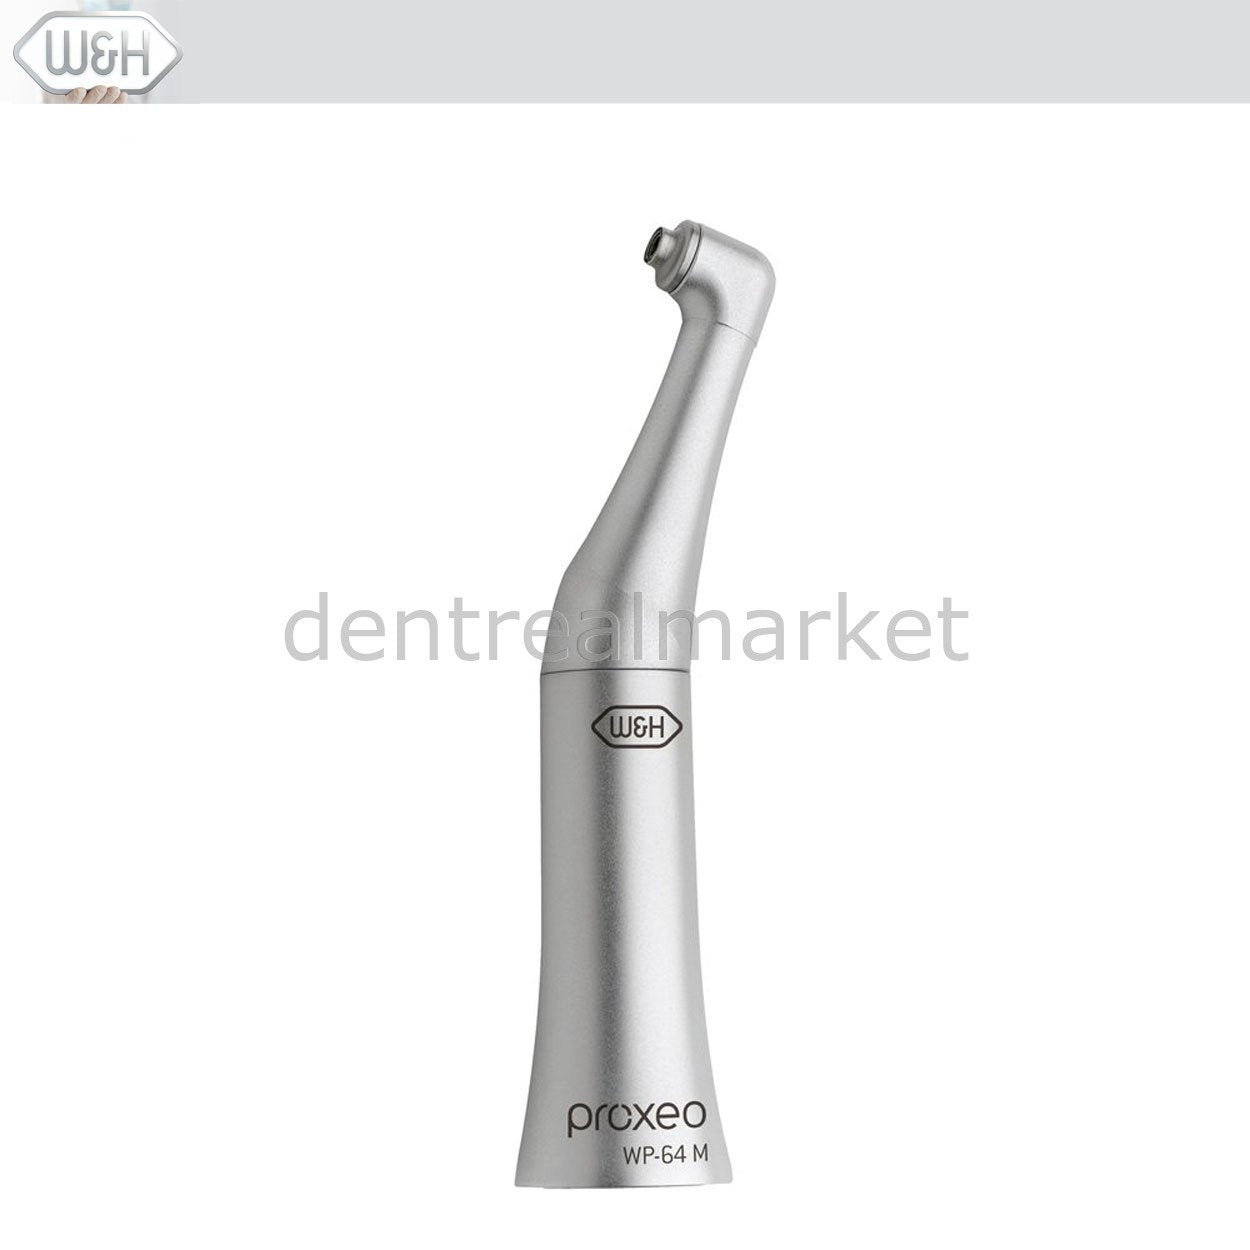 DentrealStore - W&H Dental Proxeo WP-64M - Prophylaxis Contra-angle Handle 4:1